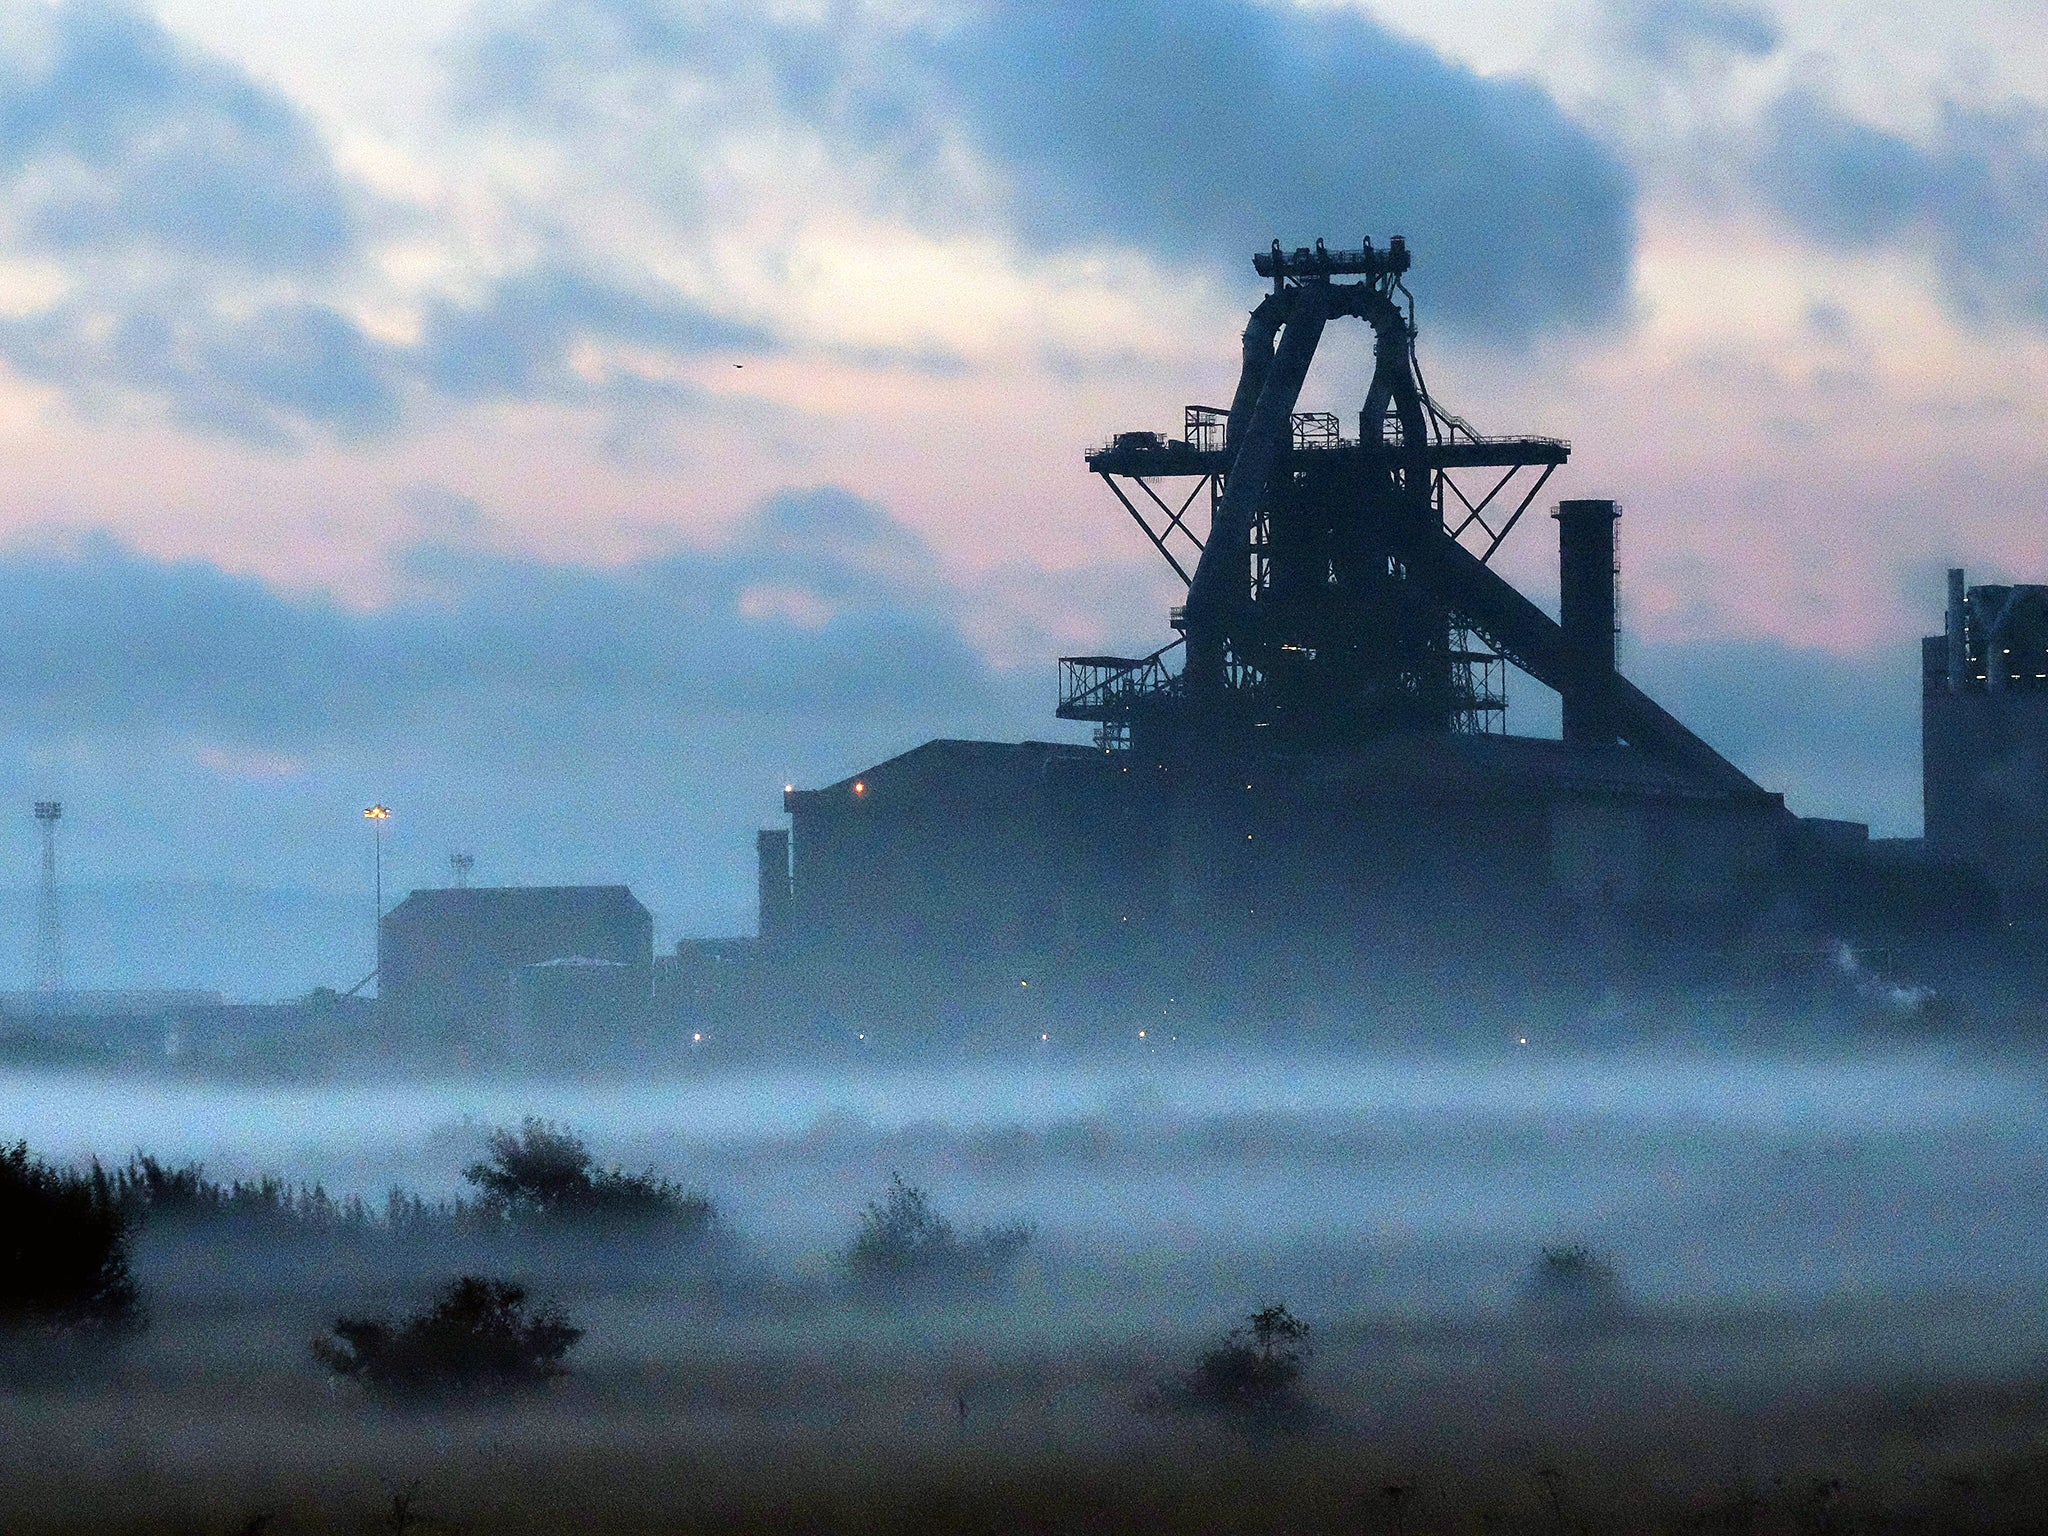 Dawn breaks over the blast furnace at the SSI UK steel plant in Redcar. Following the announcement that SSI UK are mothballing the plant and ceasing steel production 1700 jobs at the Teesside site have been lost